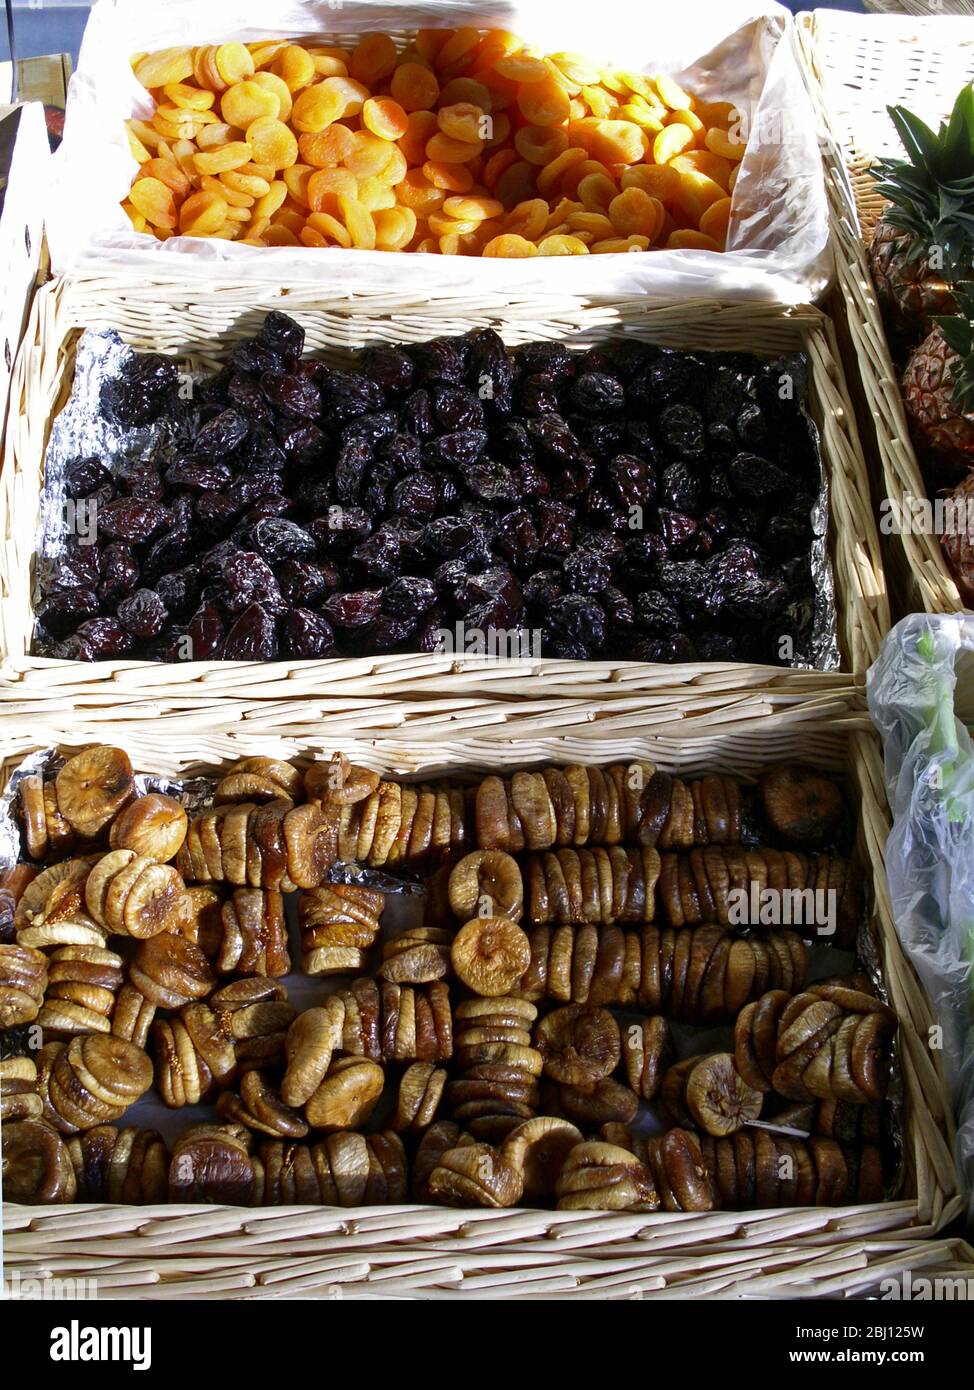 French market stall with dried figs, prunes and apricots in baskets. Northern France, Hesdin - Stock Photo